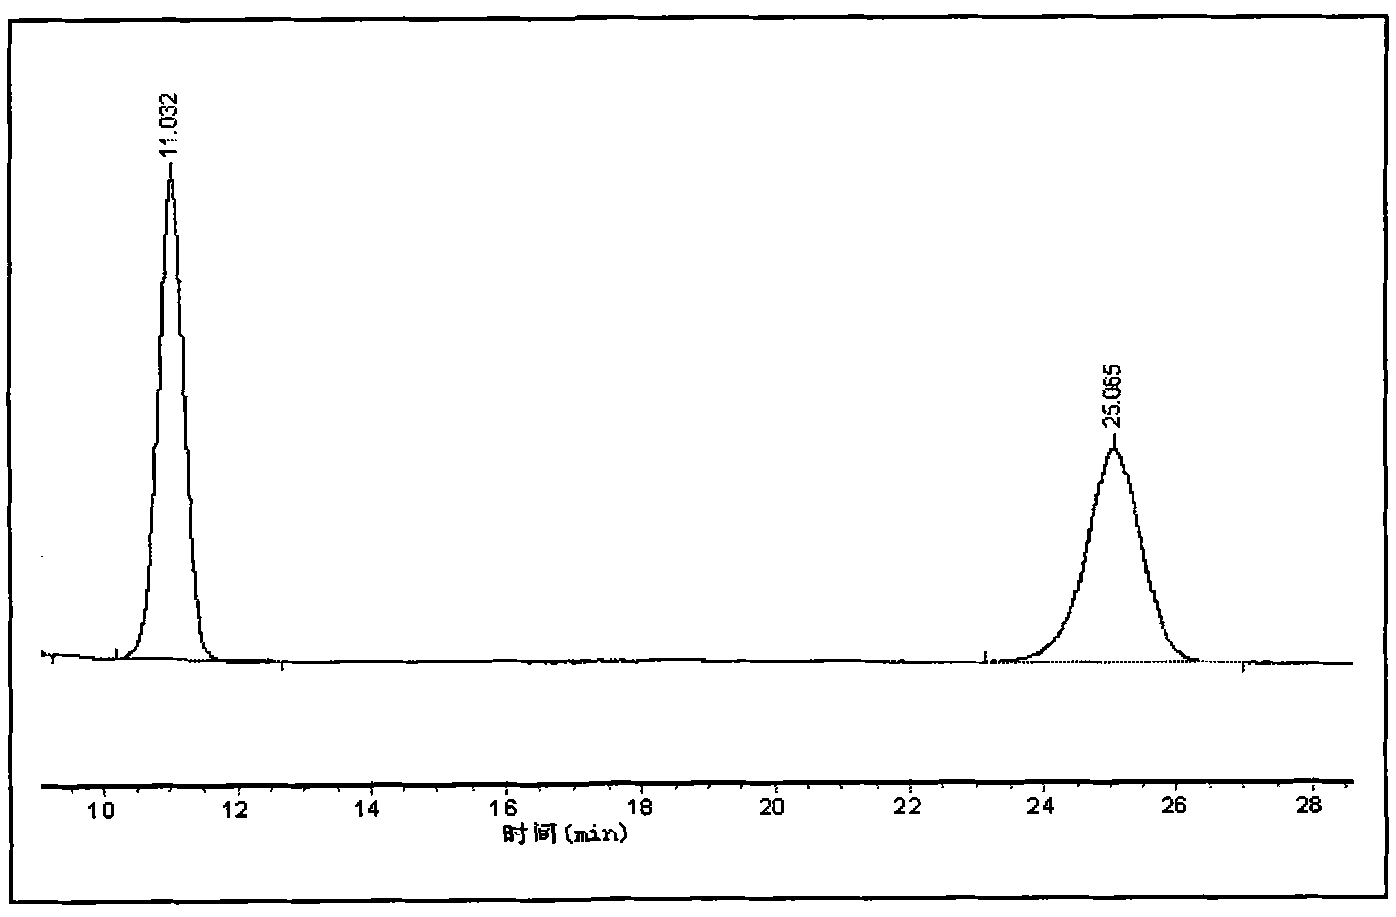 Method for preparing xylitol and L-arabinose mixed crystal from xylose mother liquid